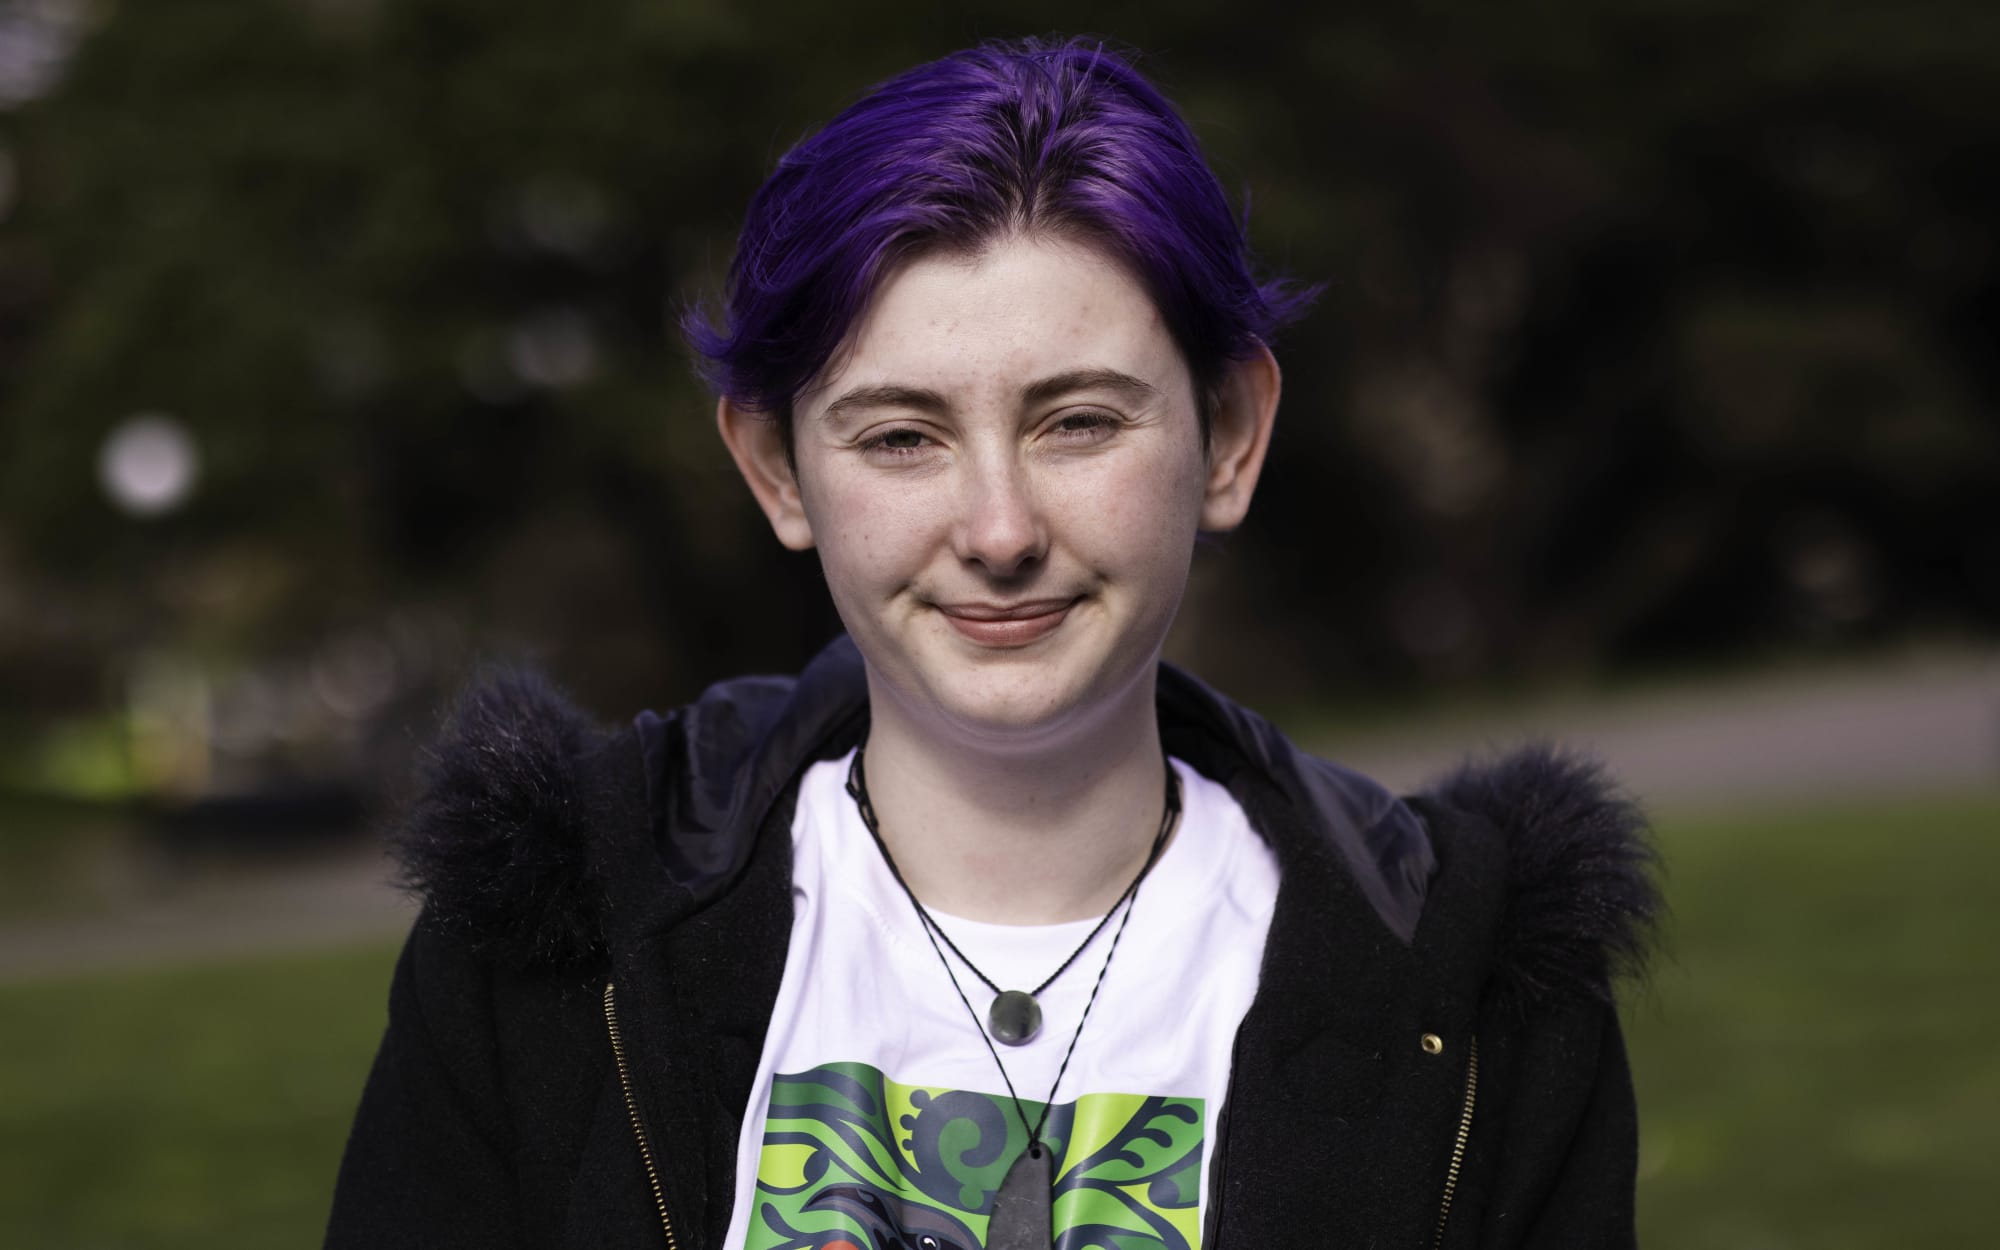 Maxine, a young woman with short purple hair and two pieces of pounamu around her neck, stands outside in front of foliage which is blurred in the background.